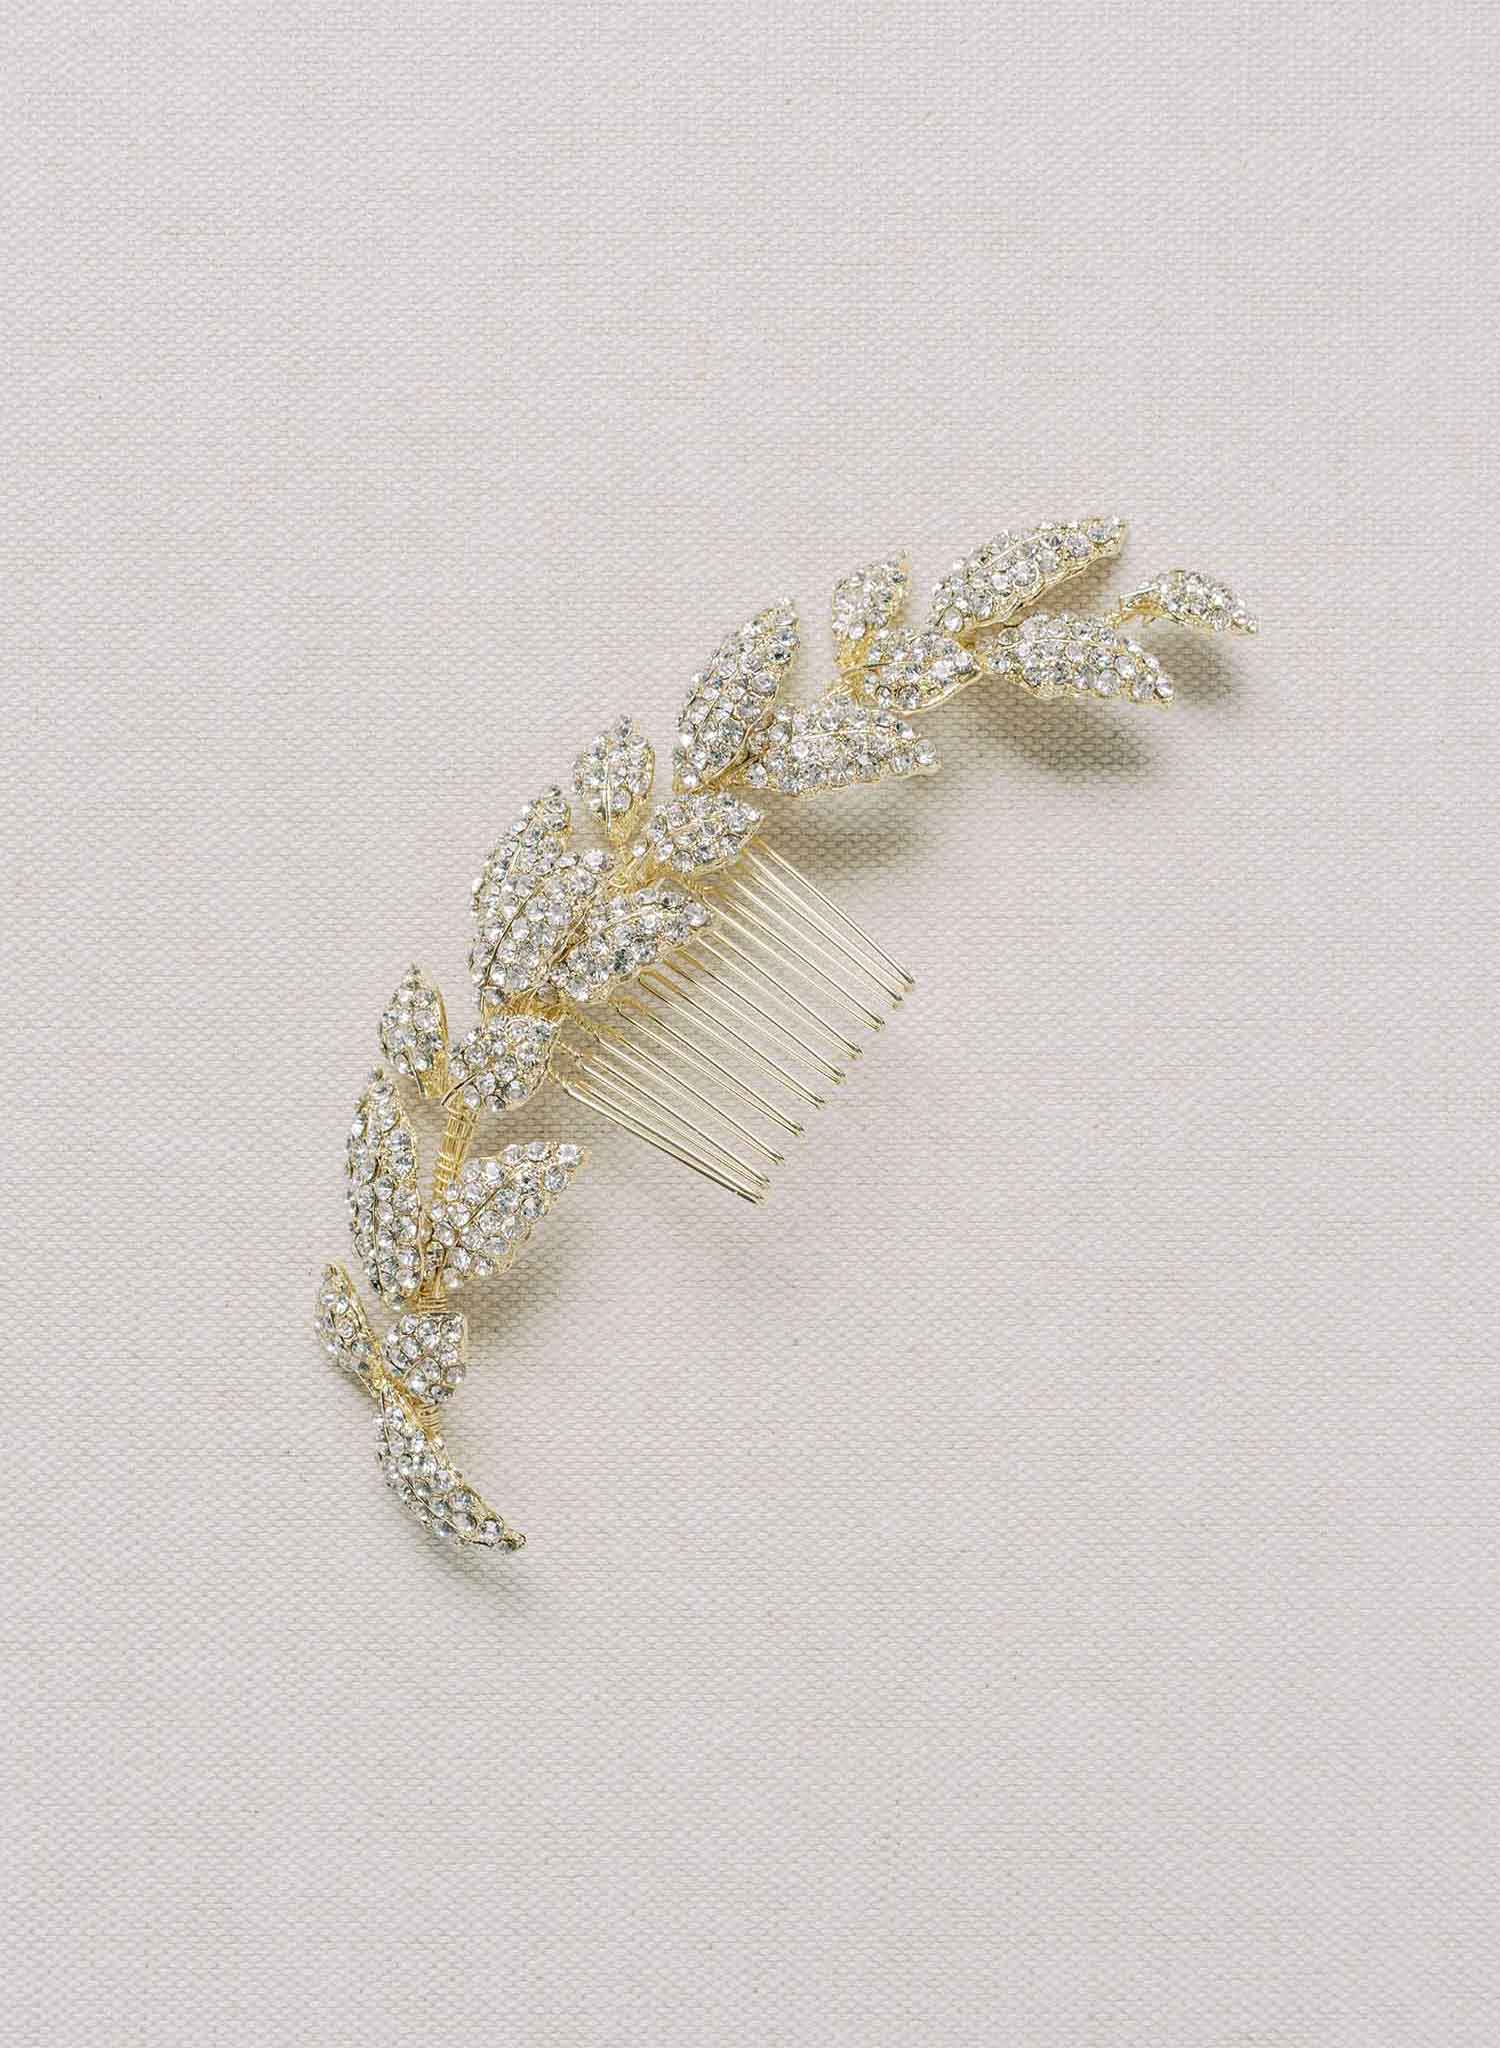 Crystal encrusted leaves hair comb - Style #2147